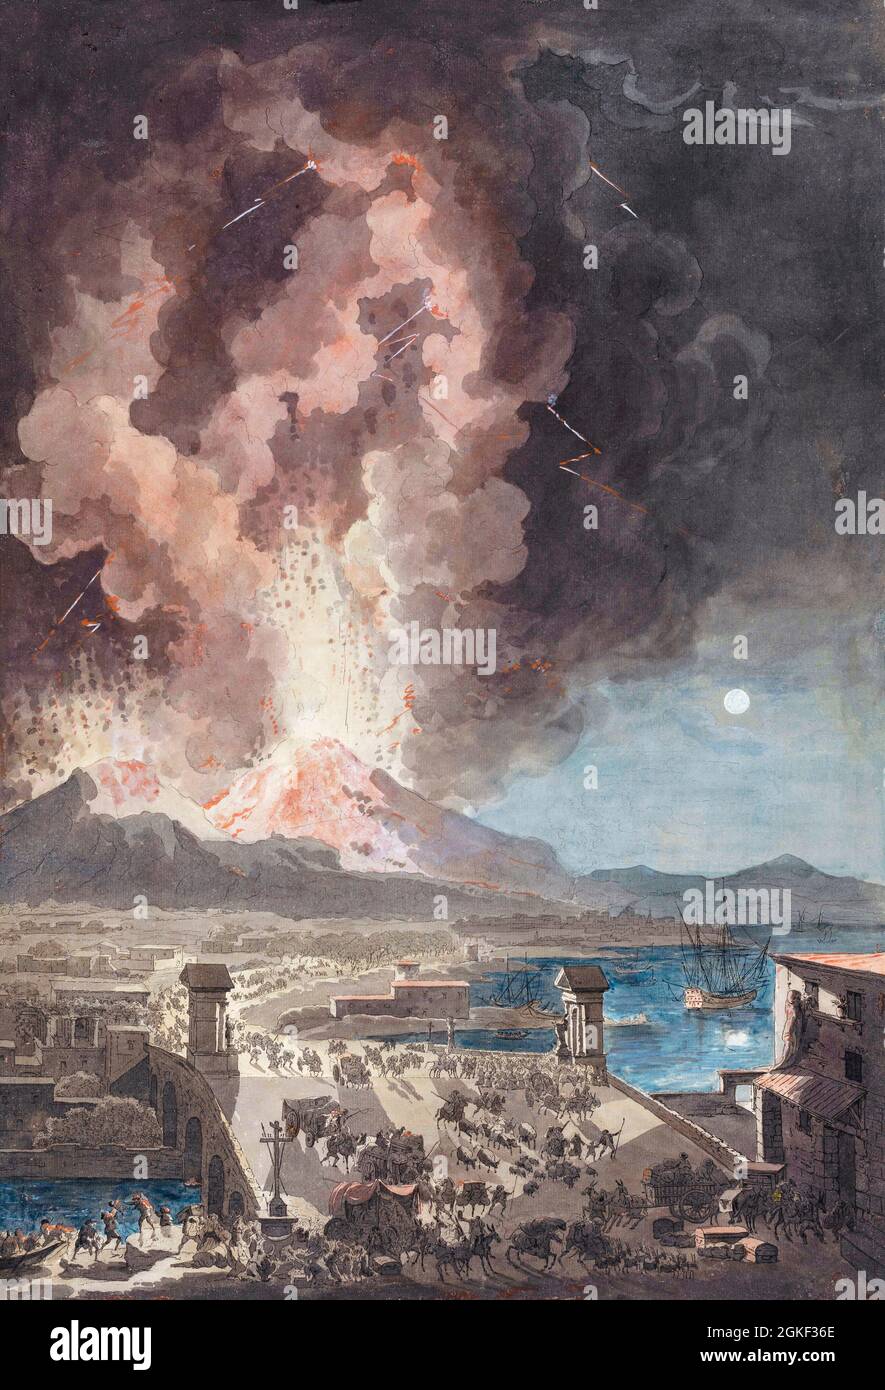 Panic in Naples, Italy, as Mount Vesuvius erupts on August 8, 1779.  Vesuvius has erupted regularly throughout history, the most famous being the event of AD79 which destroyed Pompeii and Herculaneum.  The most recent eruption was during 1944.  Vesuvius remains active.  After an 18th century print by Francesco Piranesi from a work by Louis Jean Desprez Stock Photo